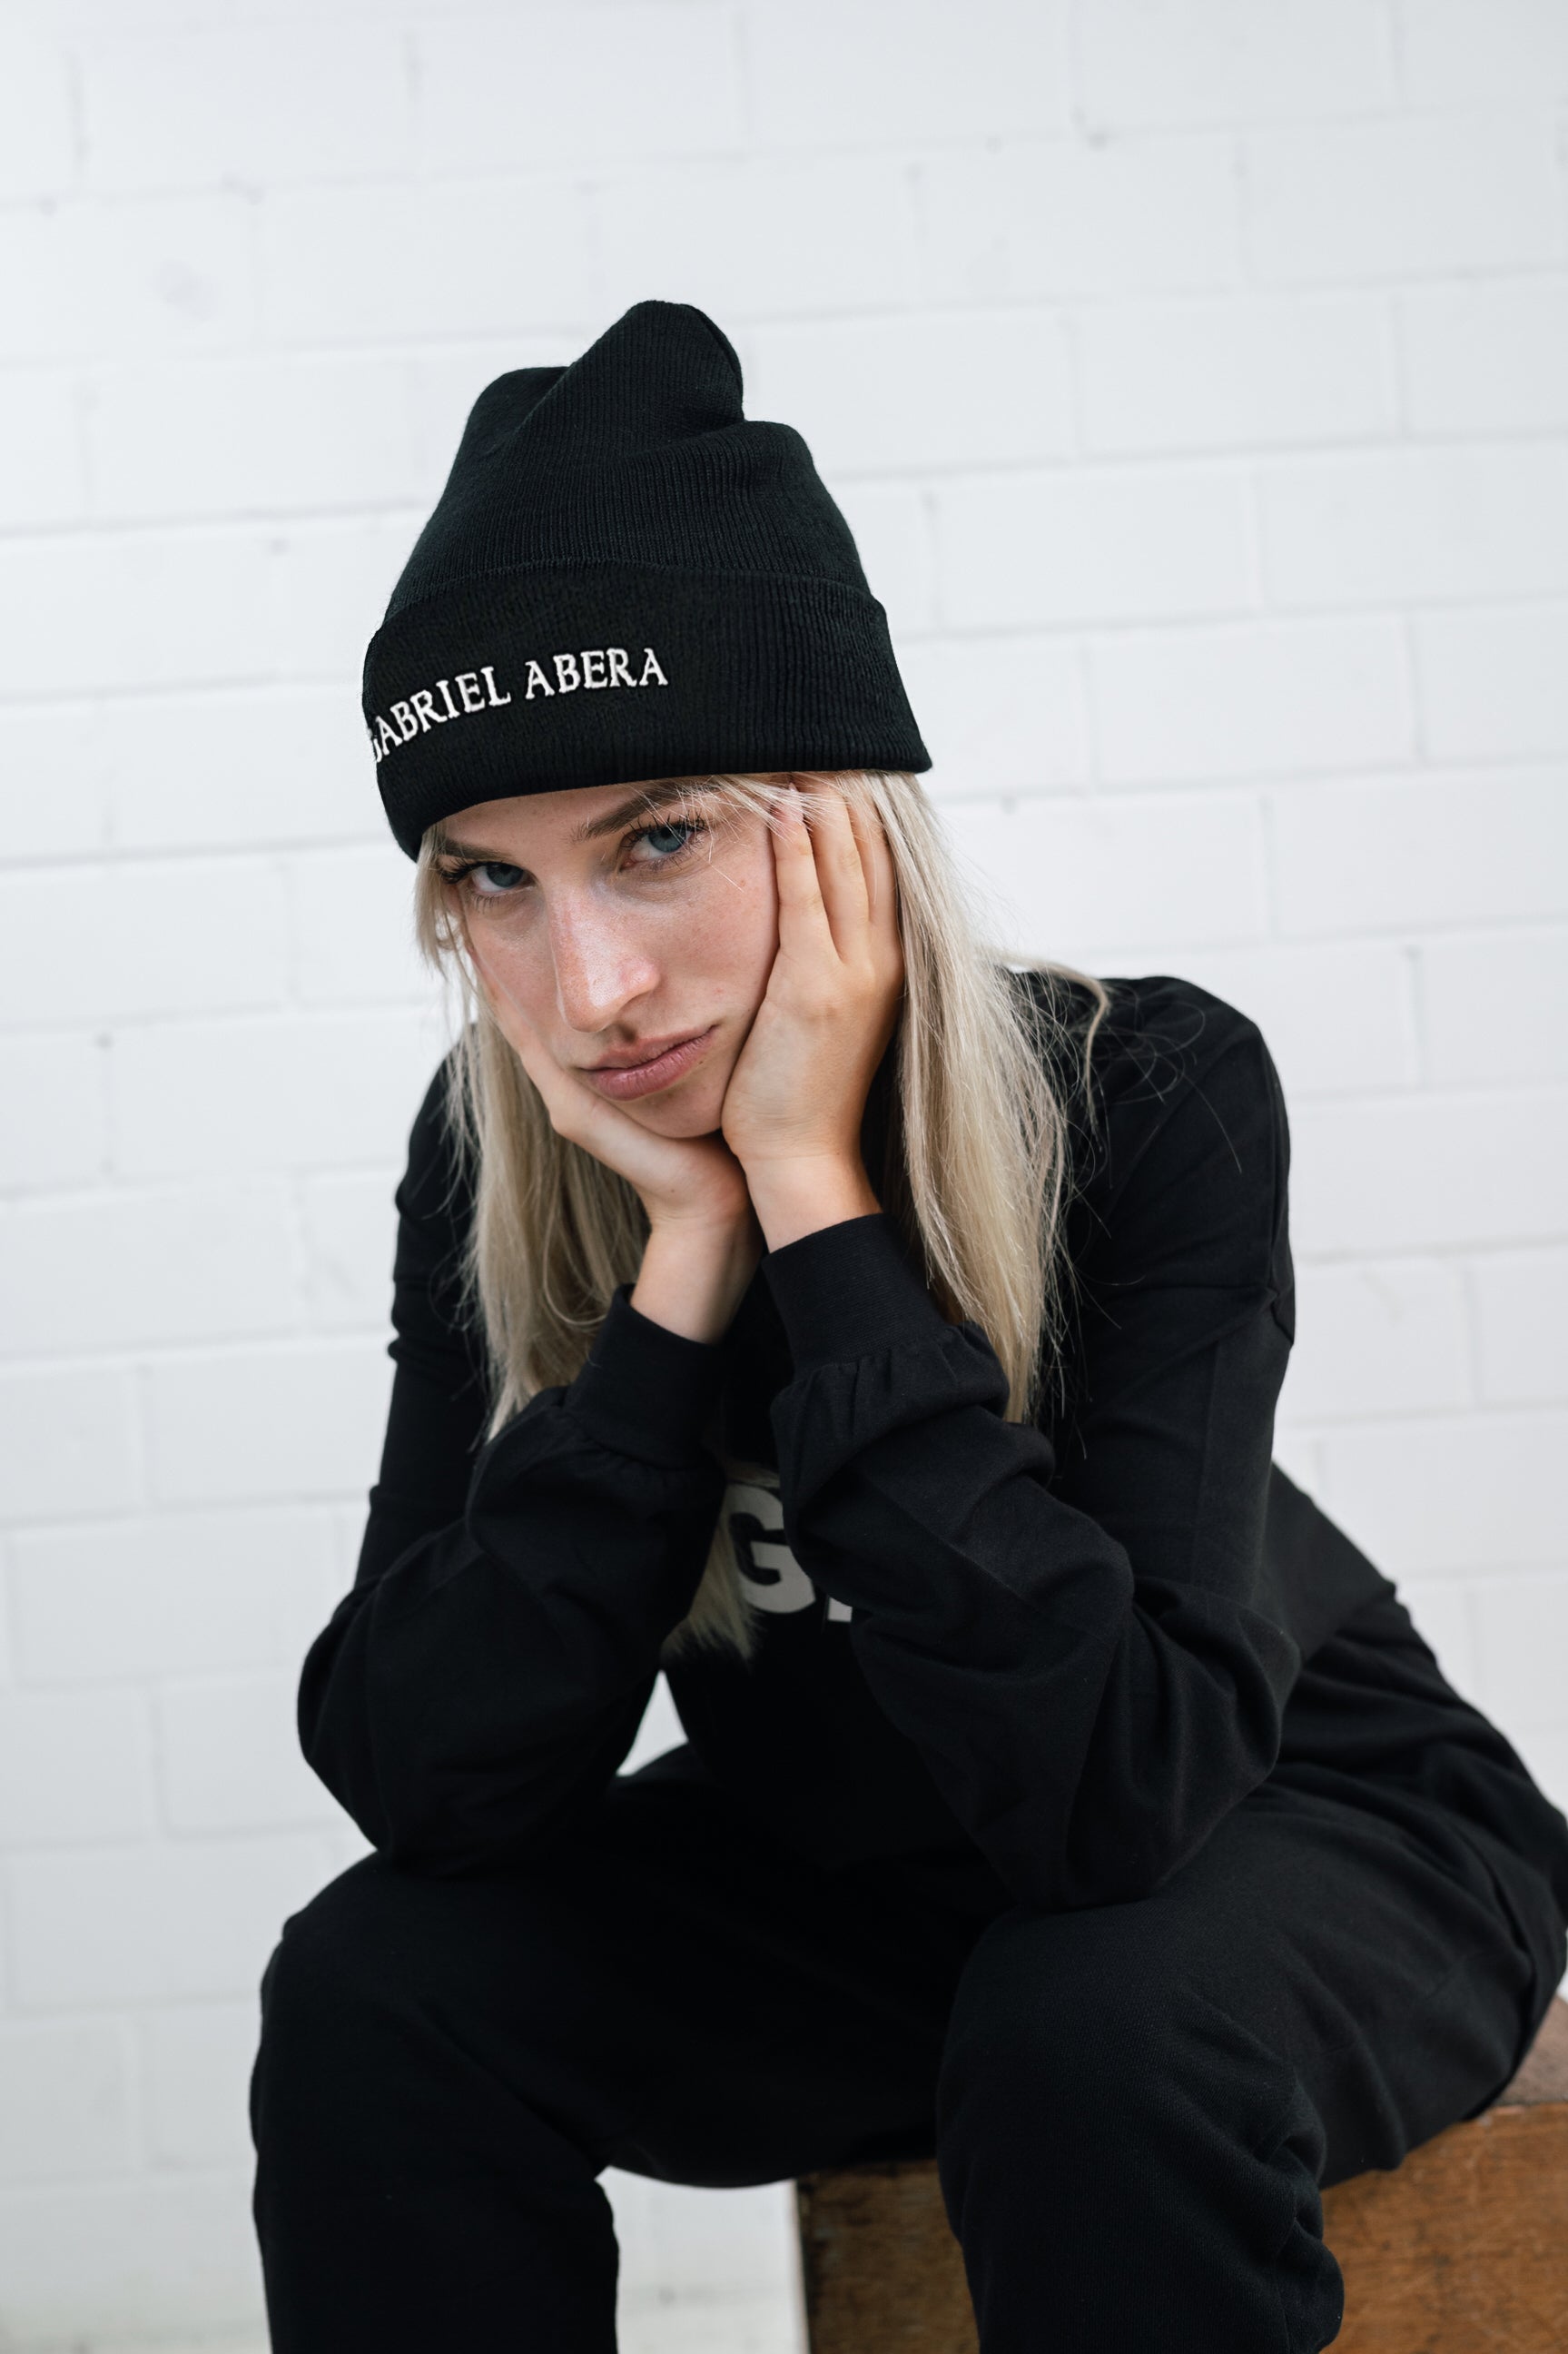 Female model wearing a Black beanie with brand name embroidery